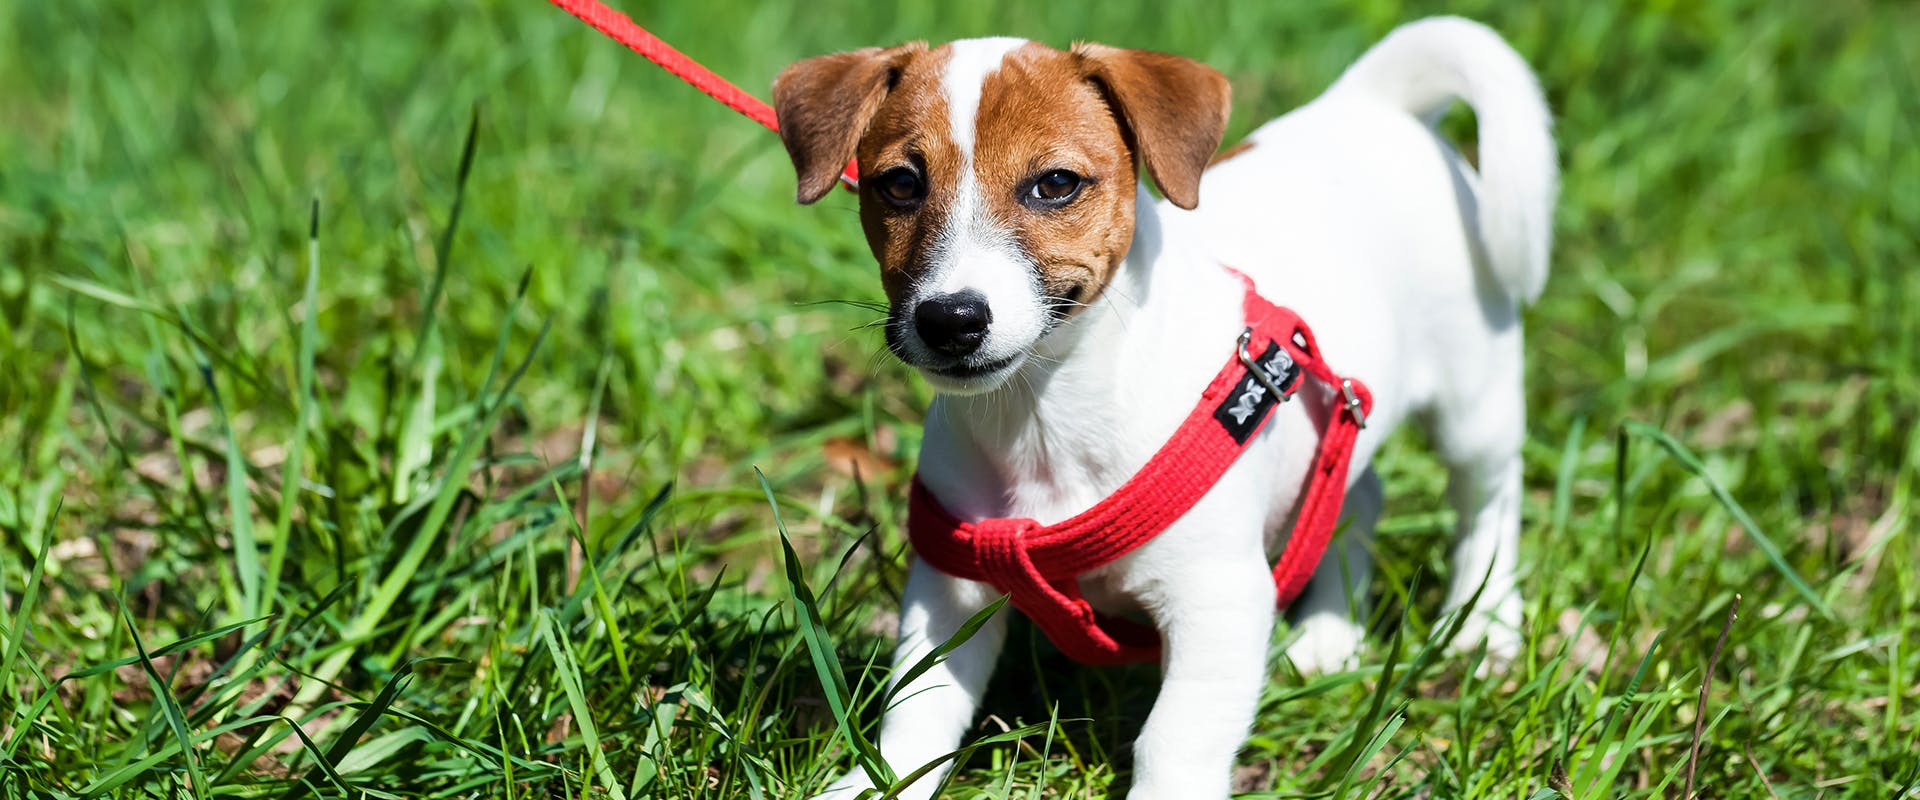 A small Jack Russell puppy standing in grass, wearing a bright red small dog harness